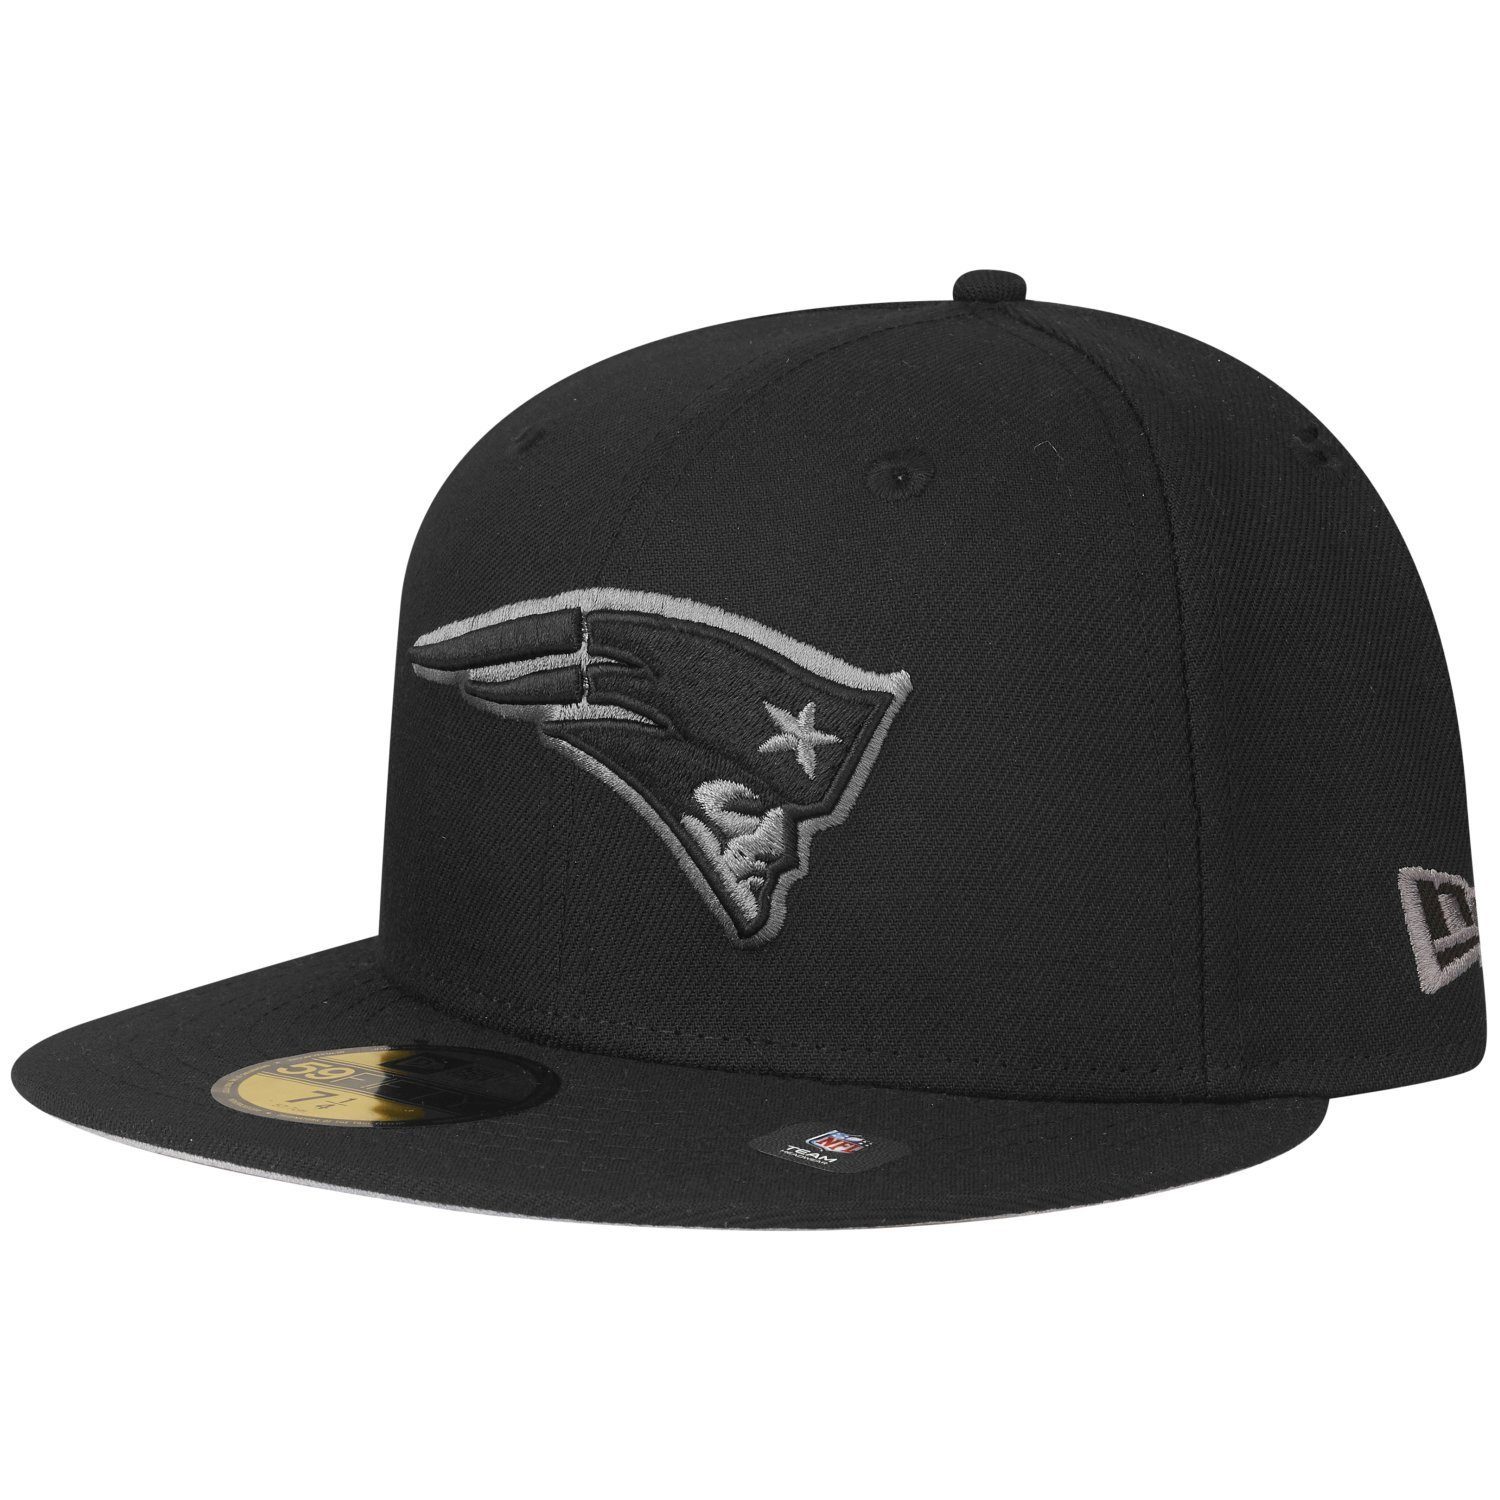 New Era Fitted Cap 59Fifty NFL TEAMS New England Patriots